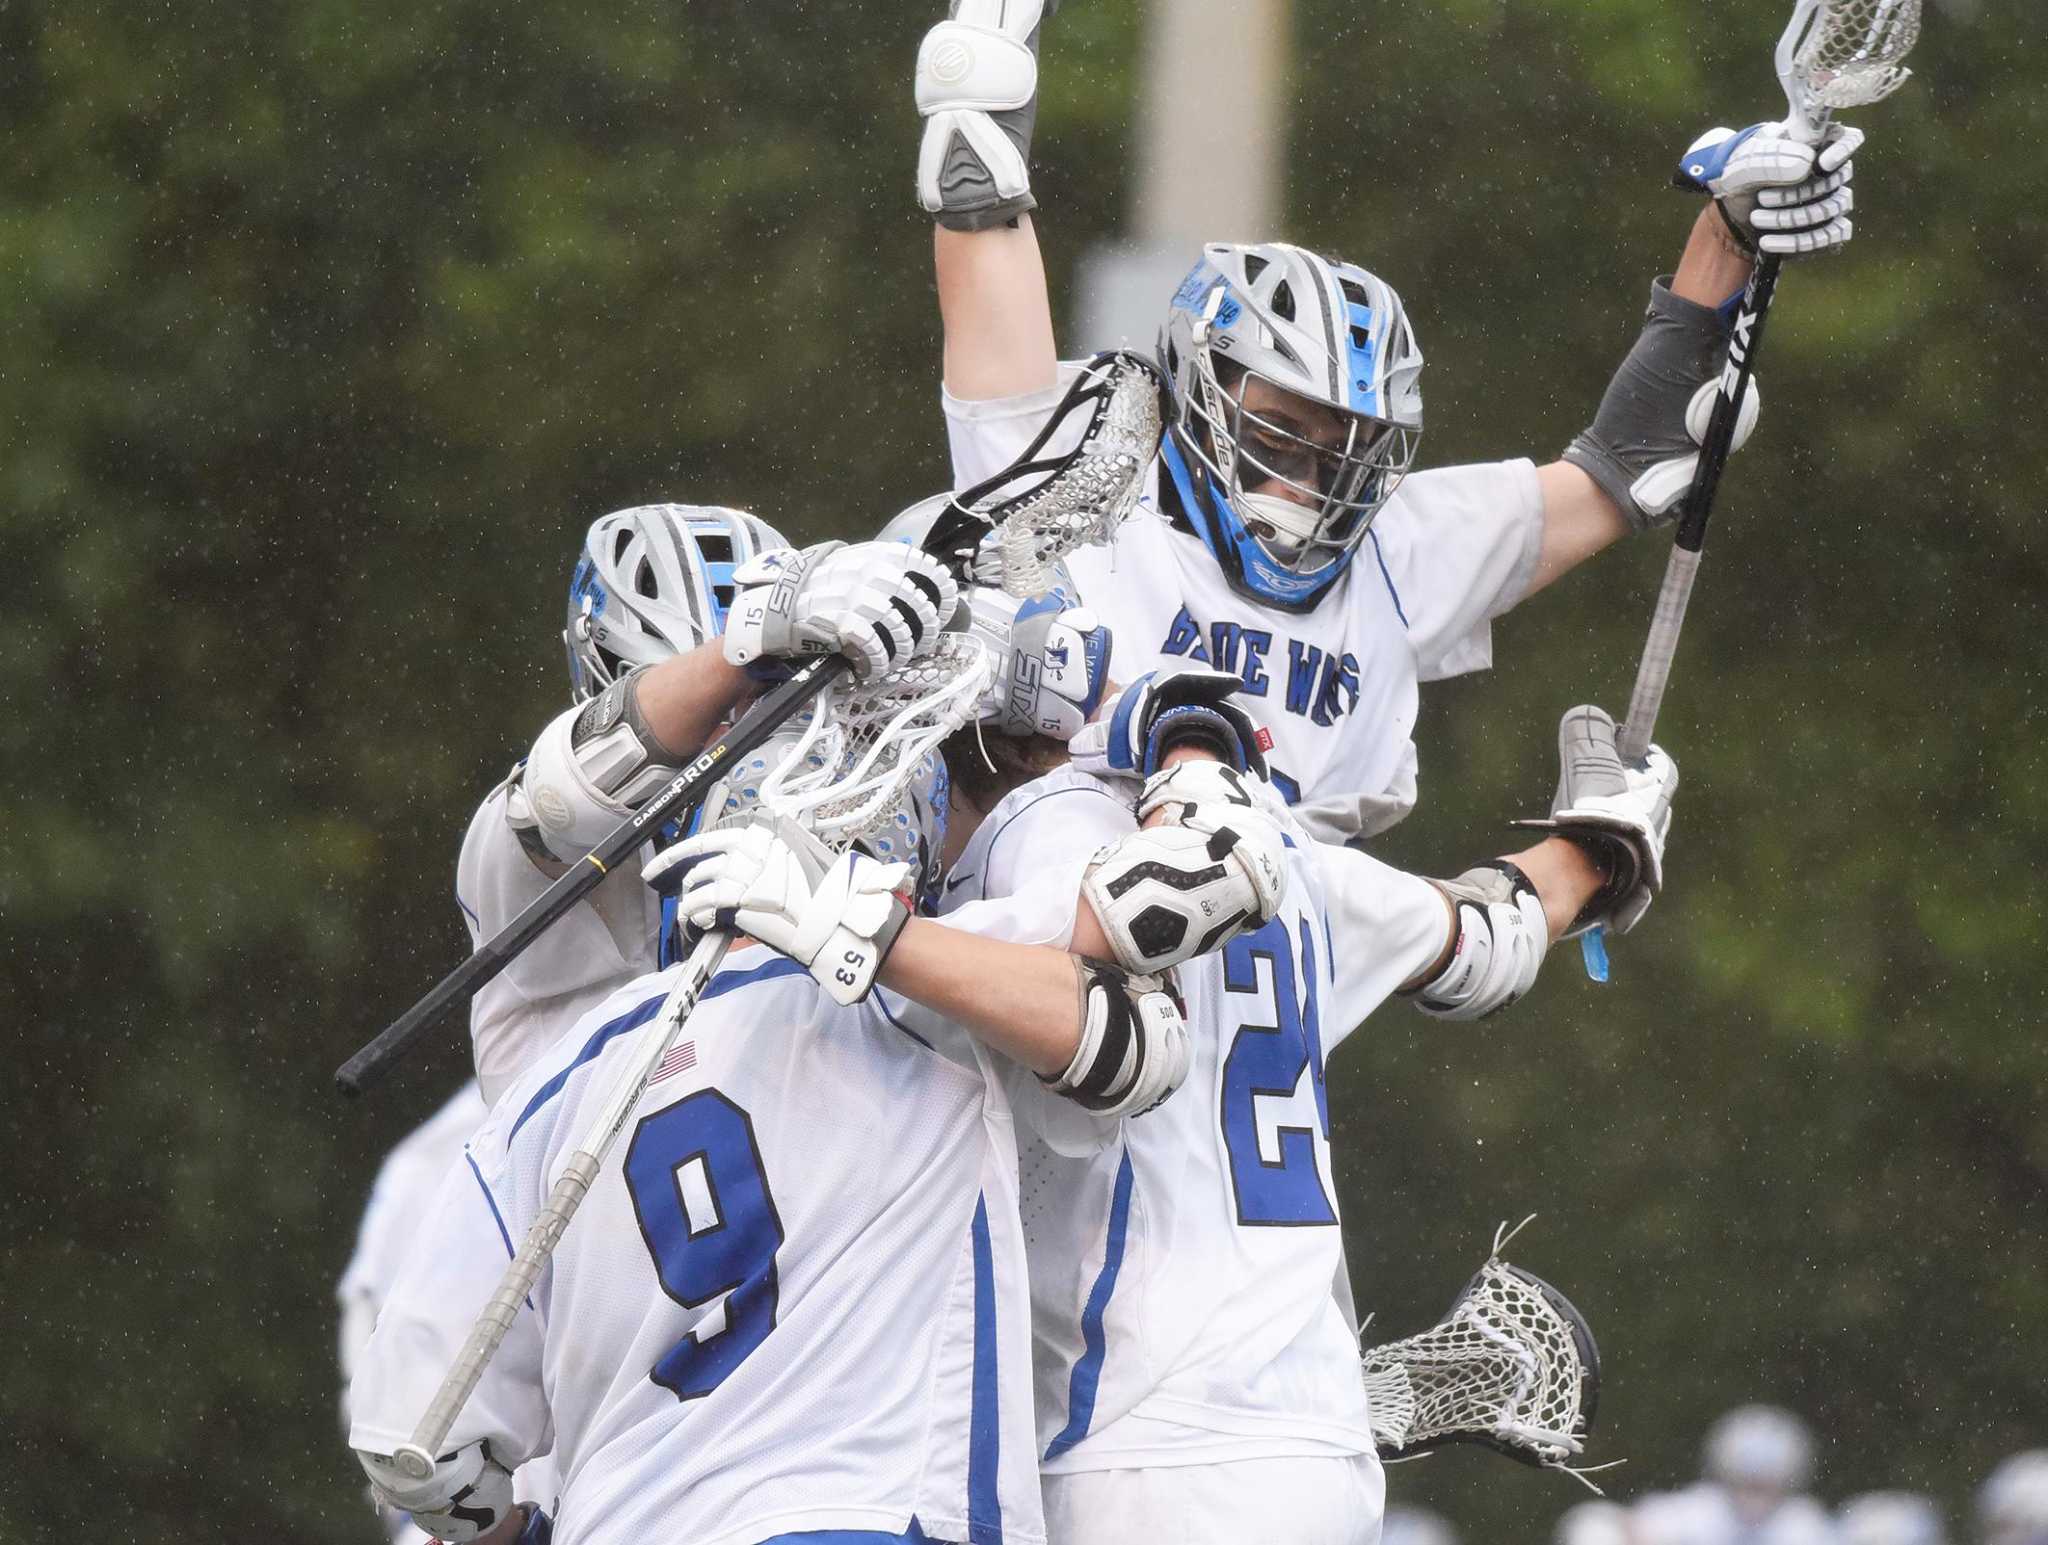 2022 CIAC boys lacrosse preview storylines and games to watch